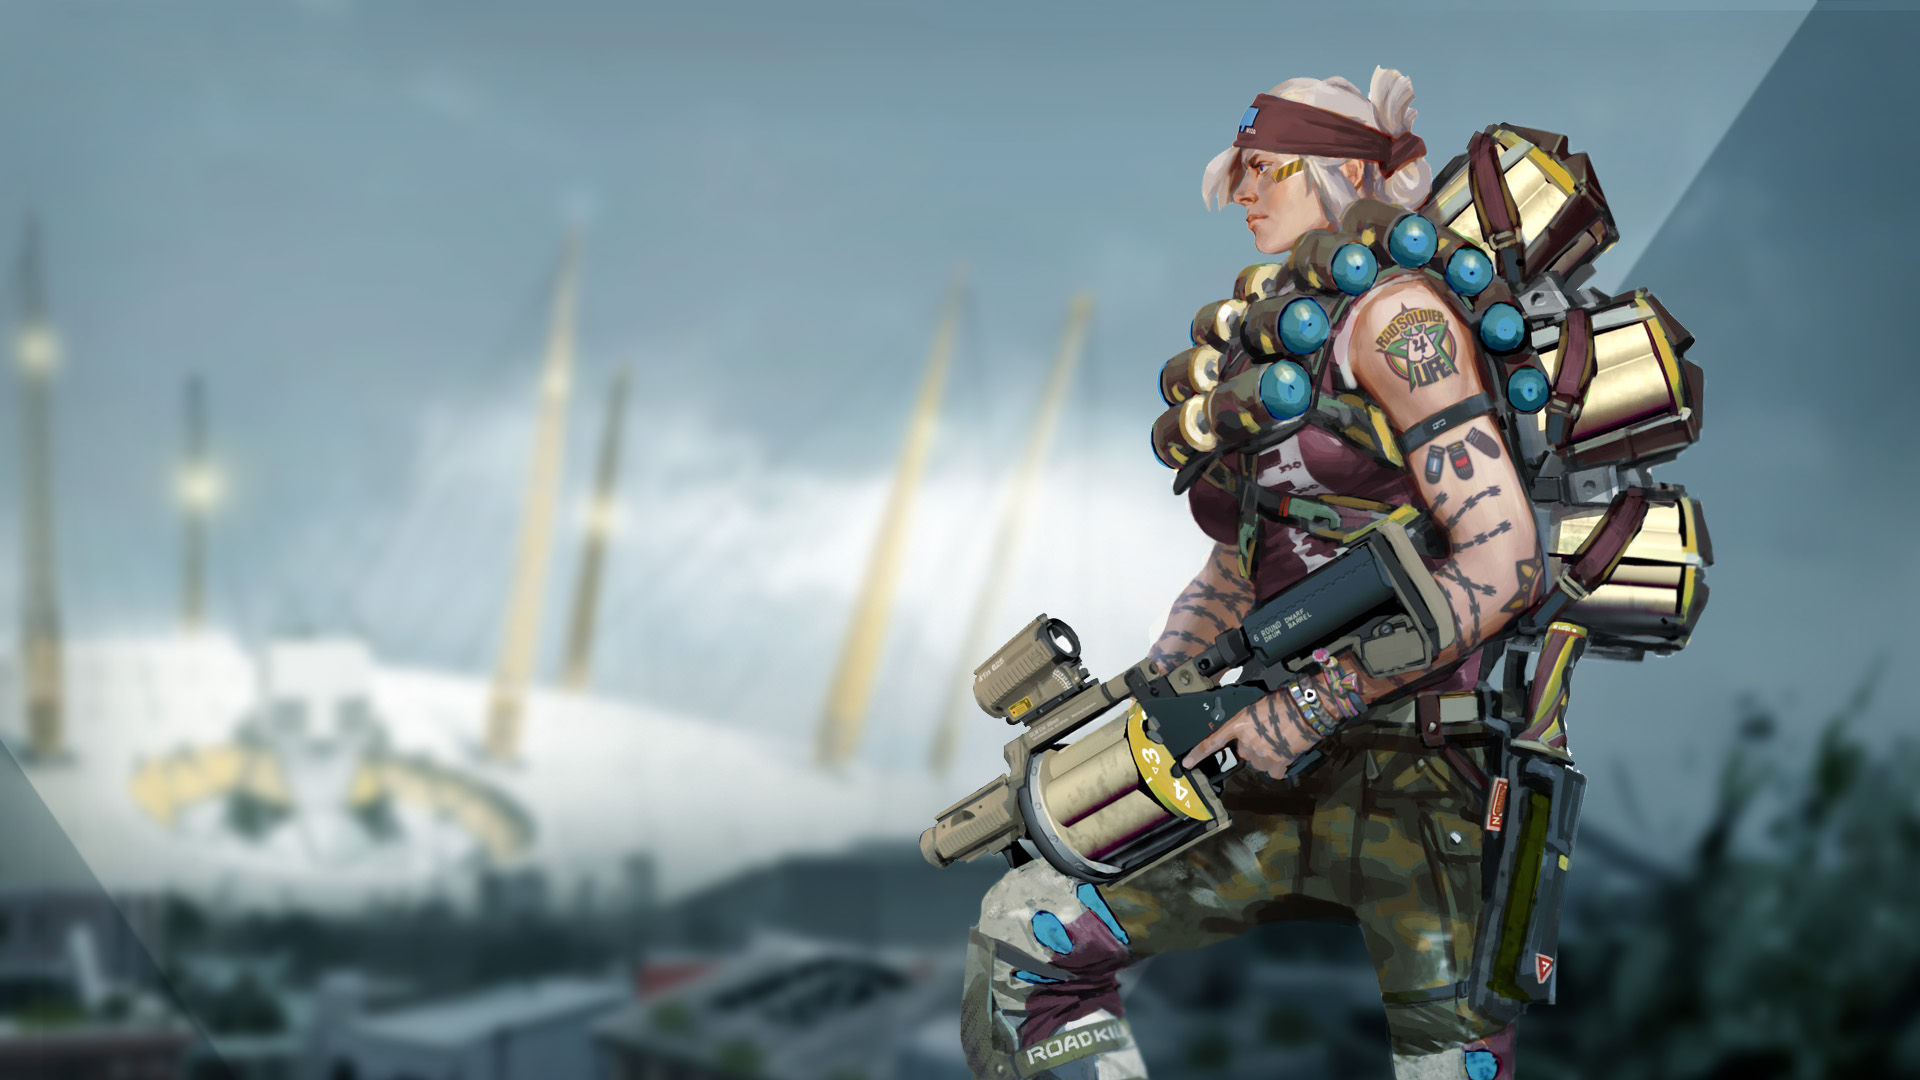 Dirty Bomb Nader Steam Trading Cards Wiki FANDOM powered by Wikia